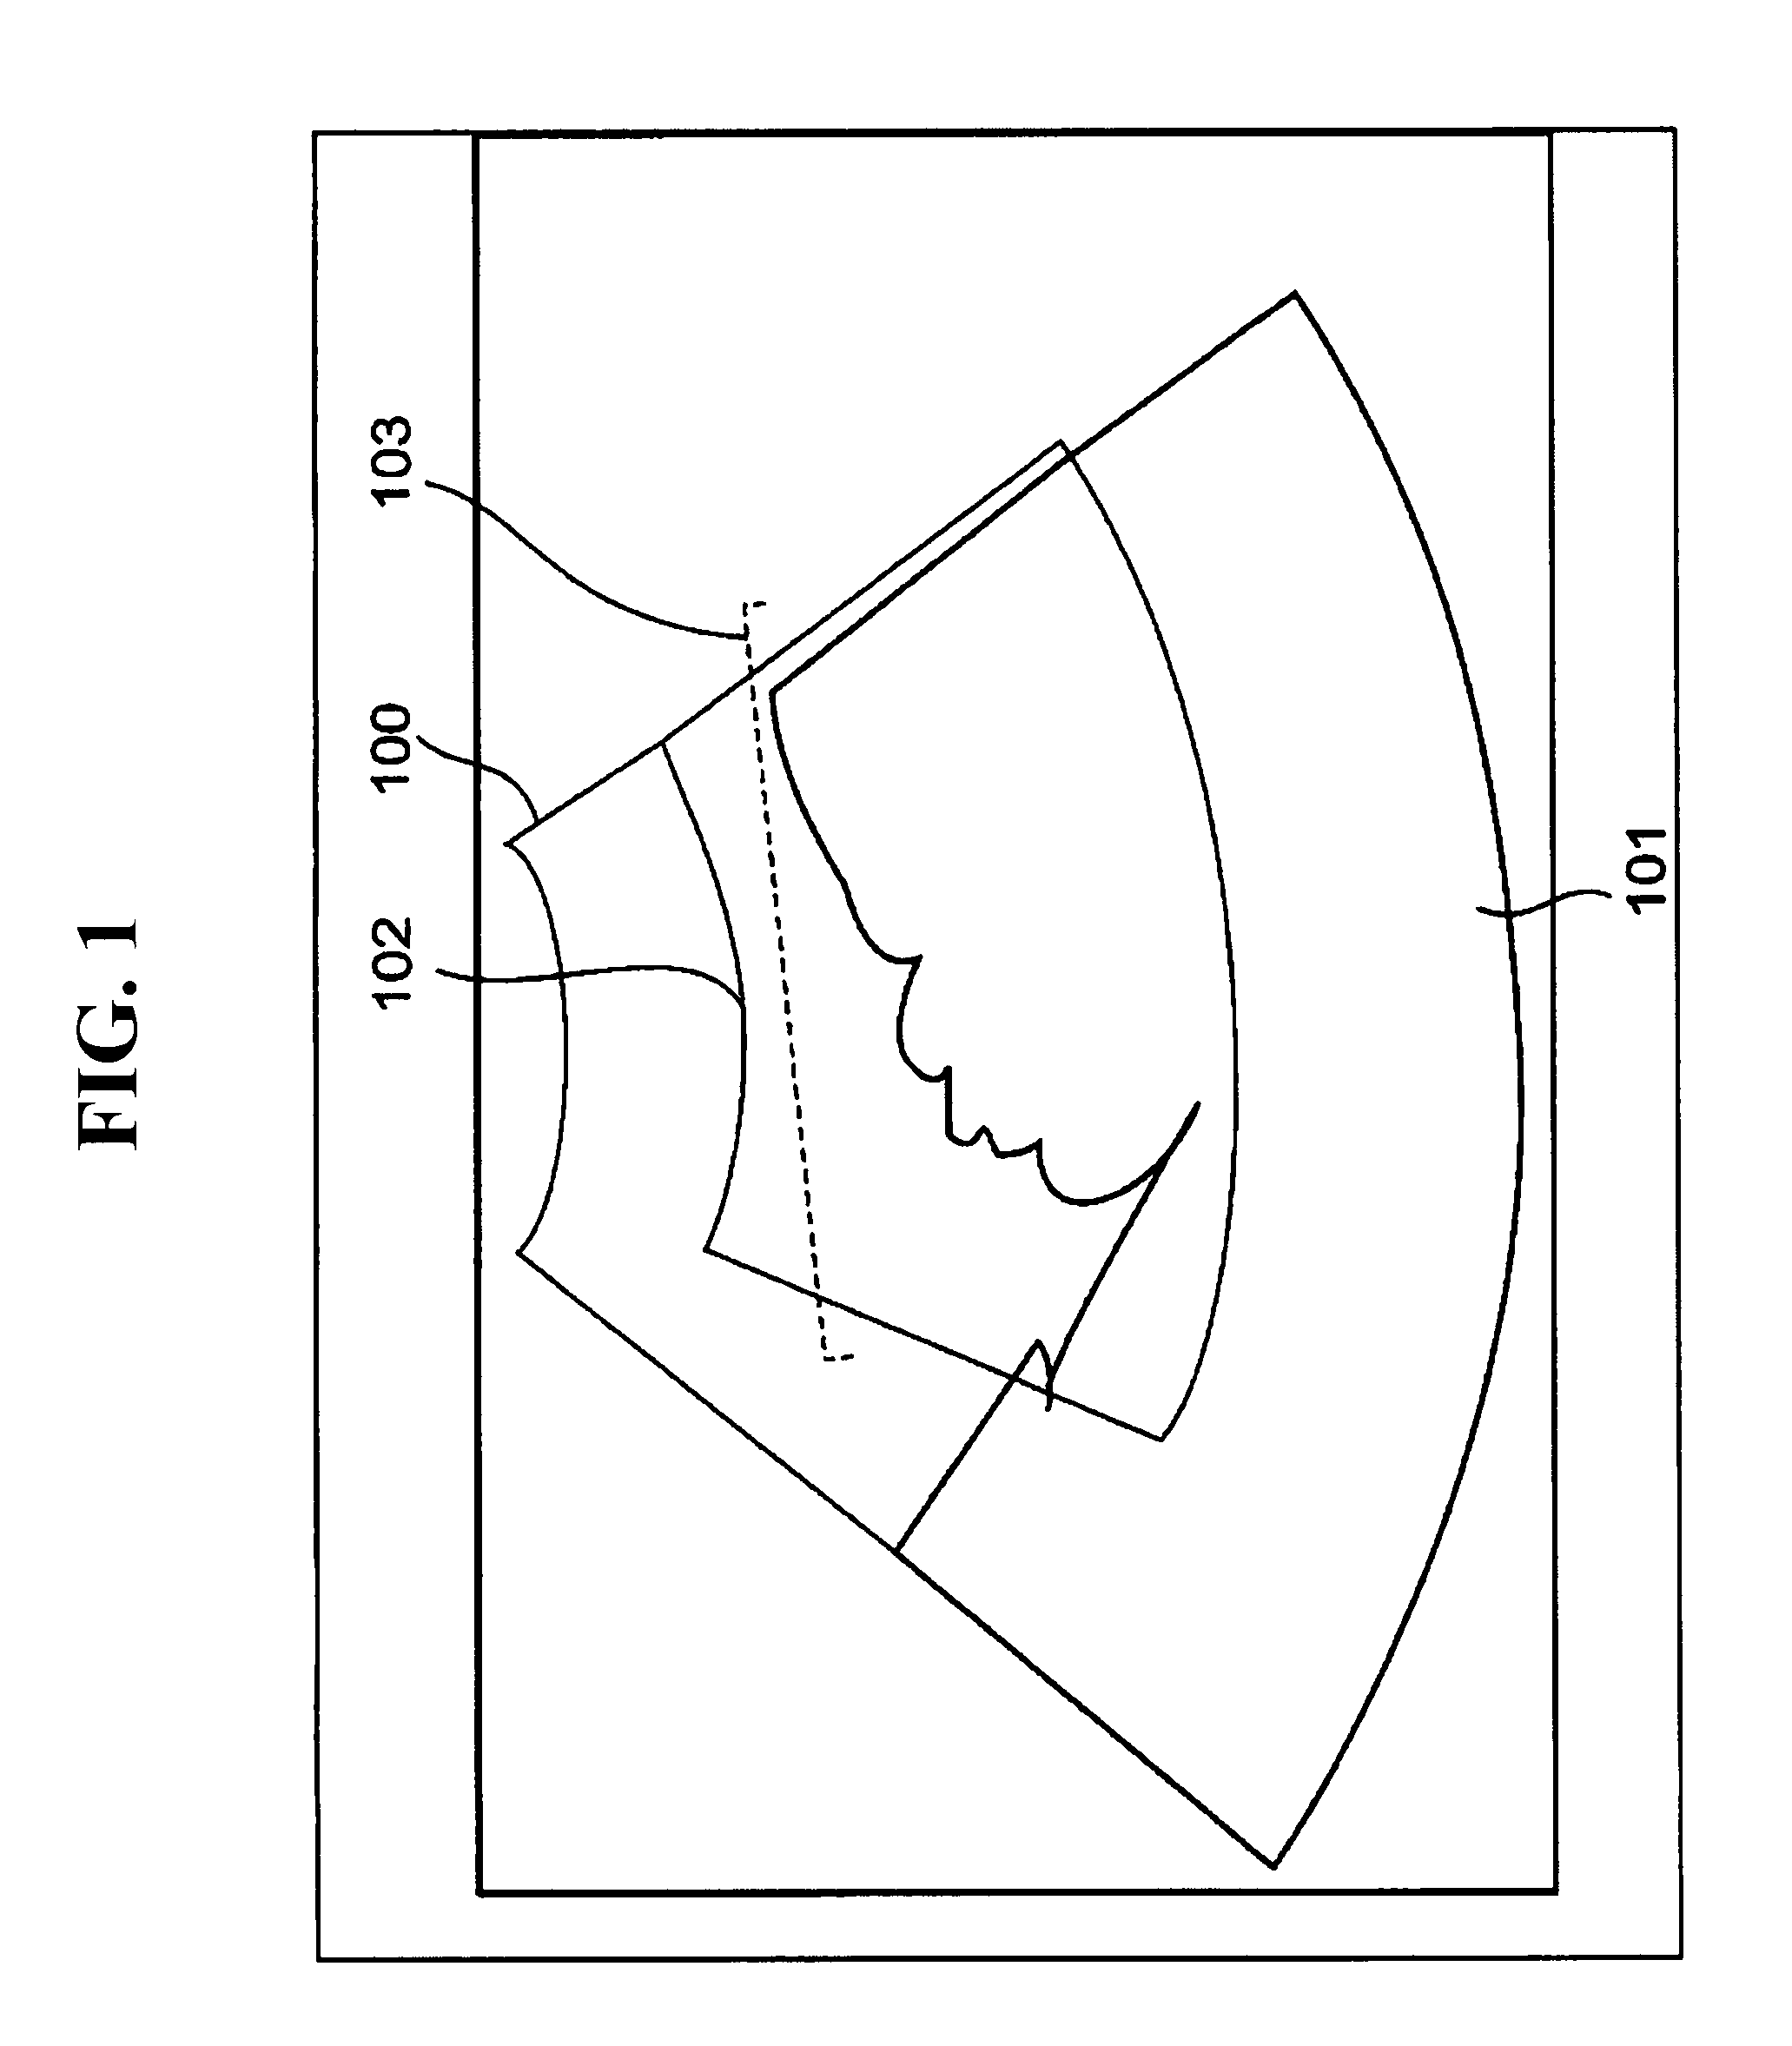 Ultrasound imaging apparatus and method for acquiring ultrasound image